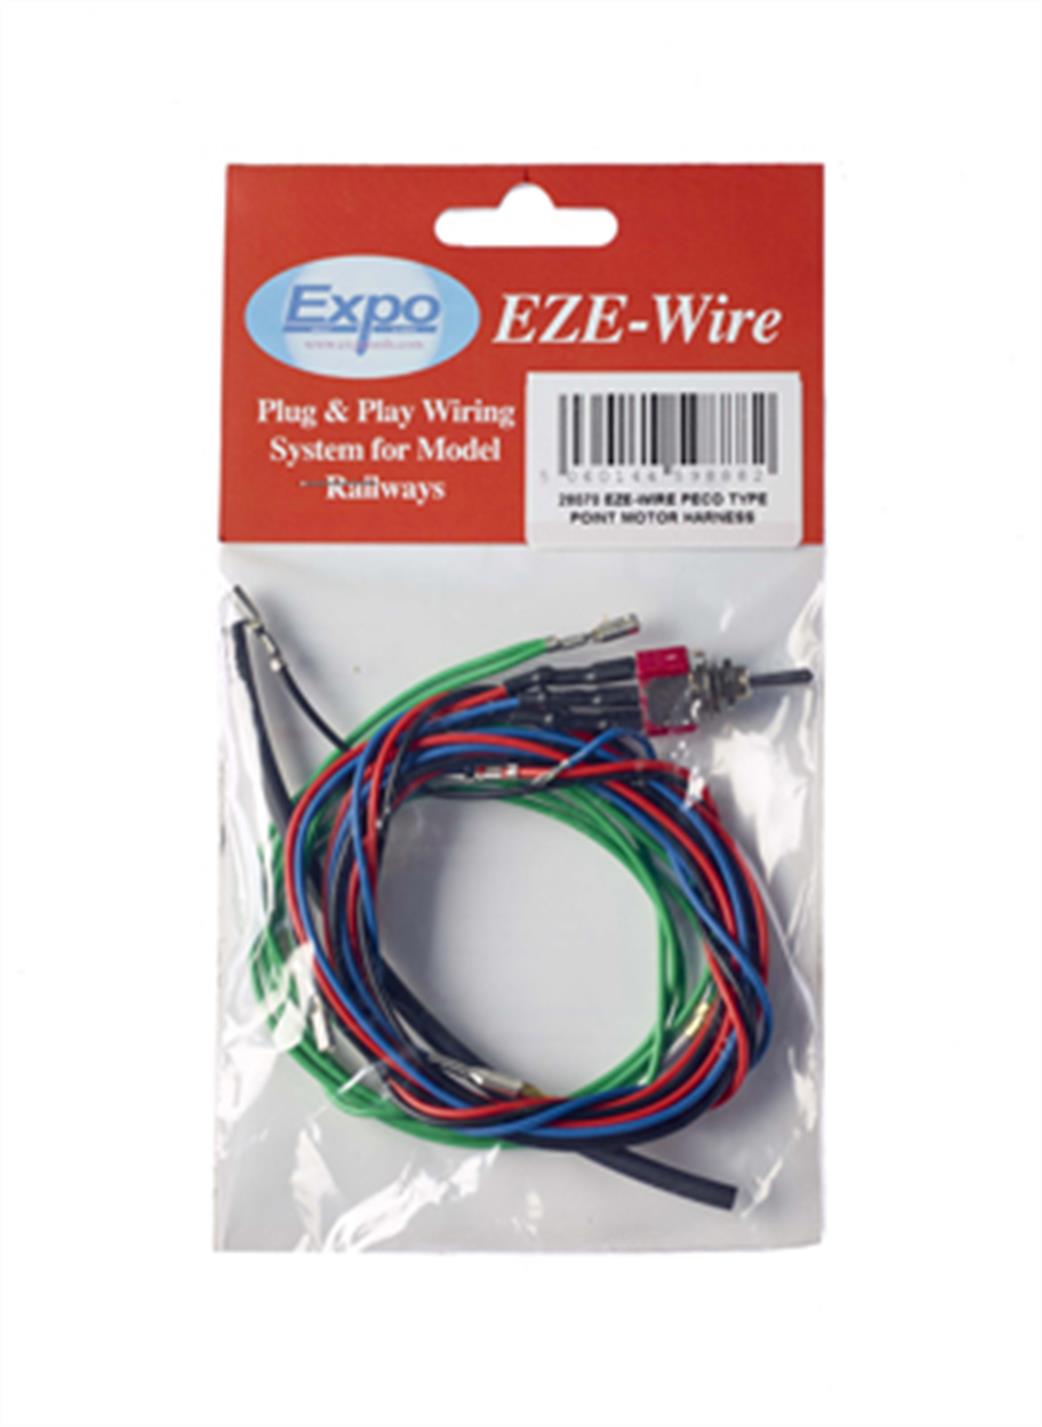 Expo  28070 EZE-Wire Point Switch with Peco Point Motor Harness